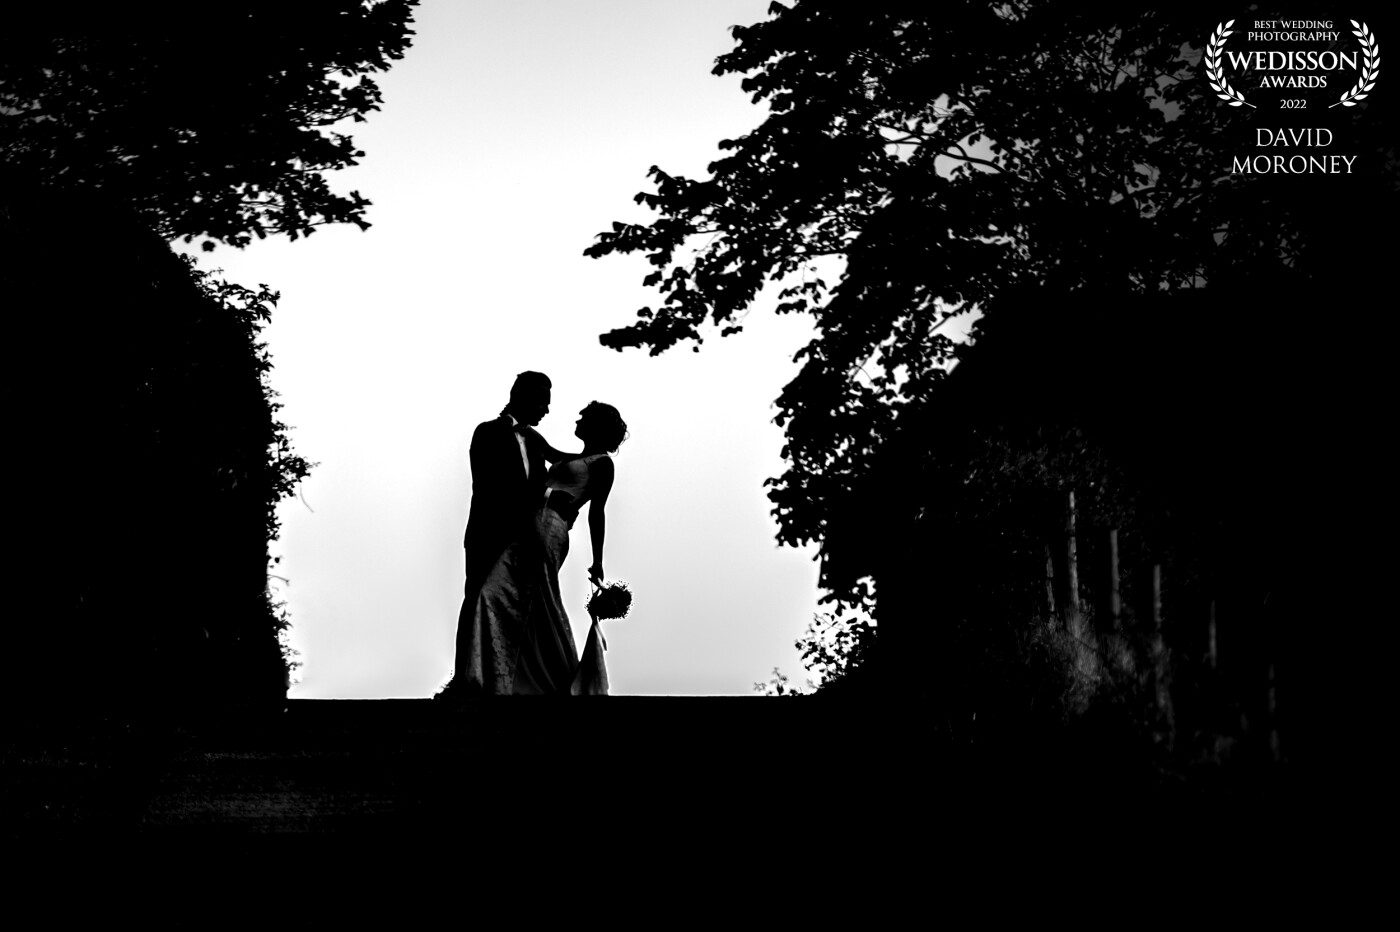 Jowita & Mihai's wedding was an intimate celebration at Stepney hill farm, Scarborough. We had just finished doing the couple shots in the nearby countryside and they decided to walk back to the venue up the hill. As I was packing up some equipment I glanced up and saw the sillouette, I shouted for them to stop for a second.. without any prompting Mihai threw Jowita back in his arms and I took the shot.